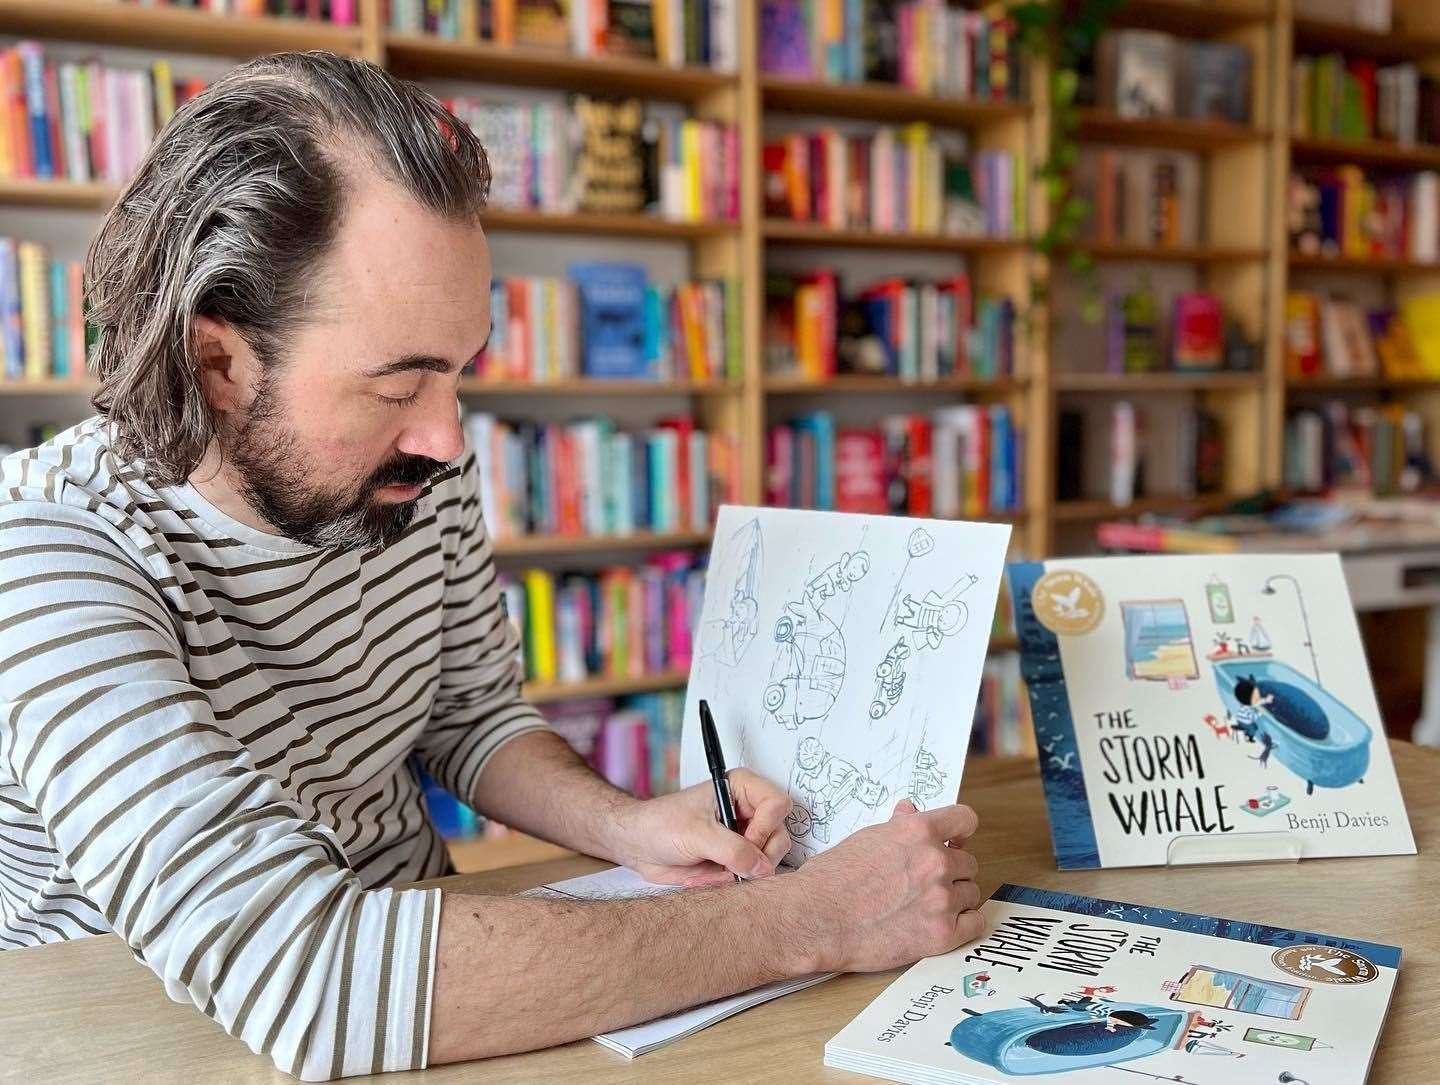 Illustrator of The Storm Whale, Benji Davies has revealed his drawings were inspired by a trip to Whitstable. Picture: Benji Davies